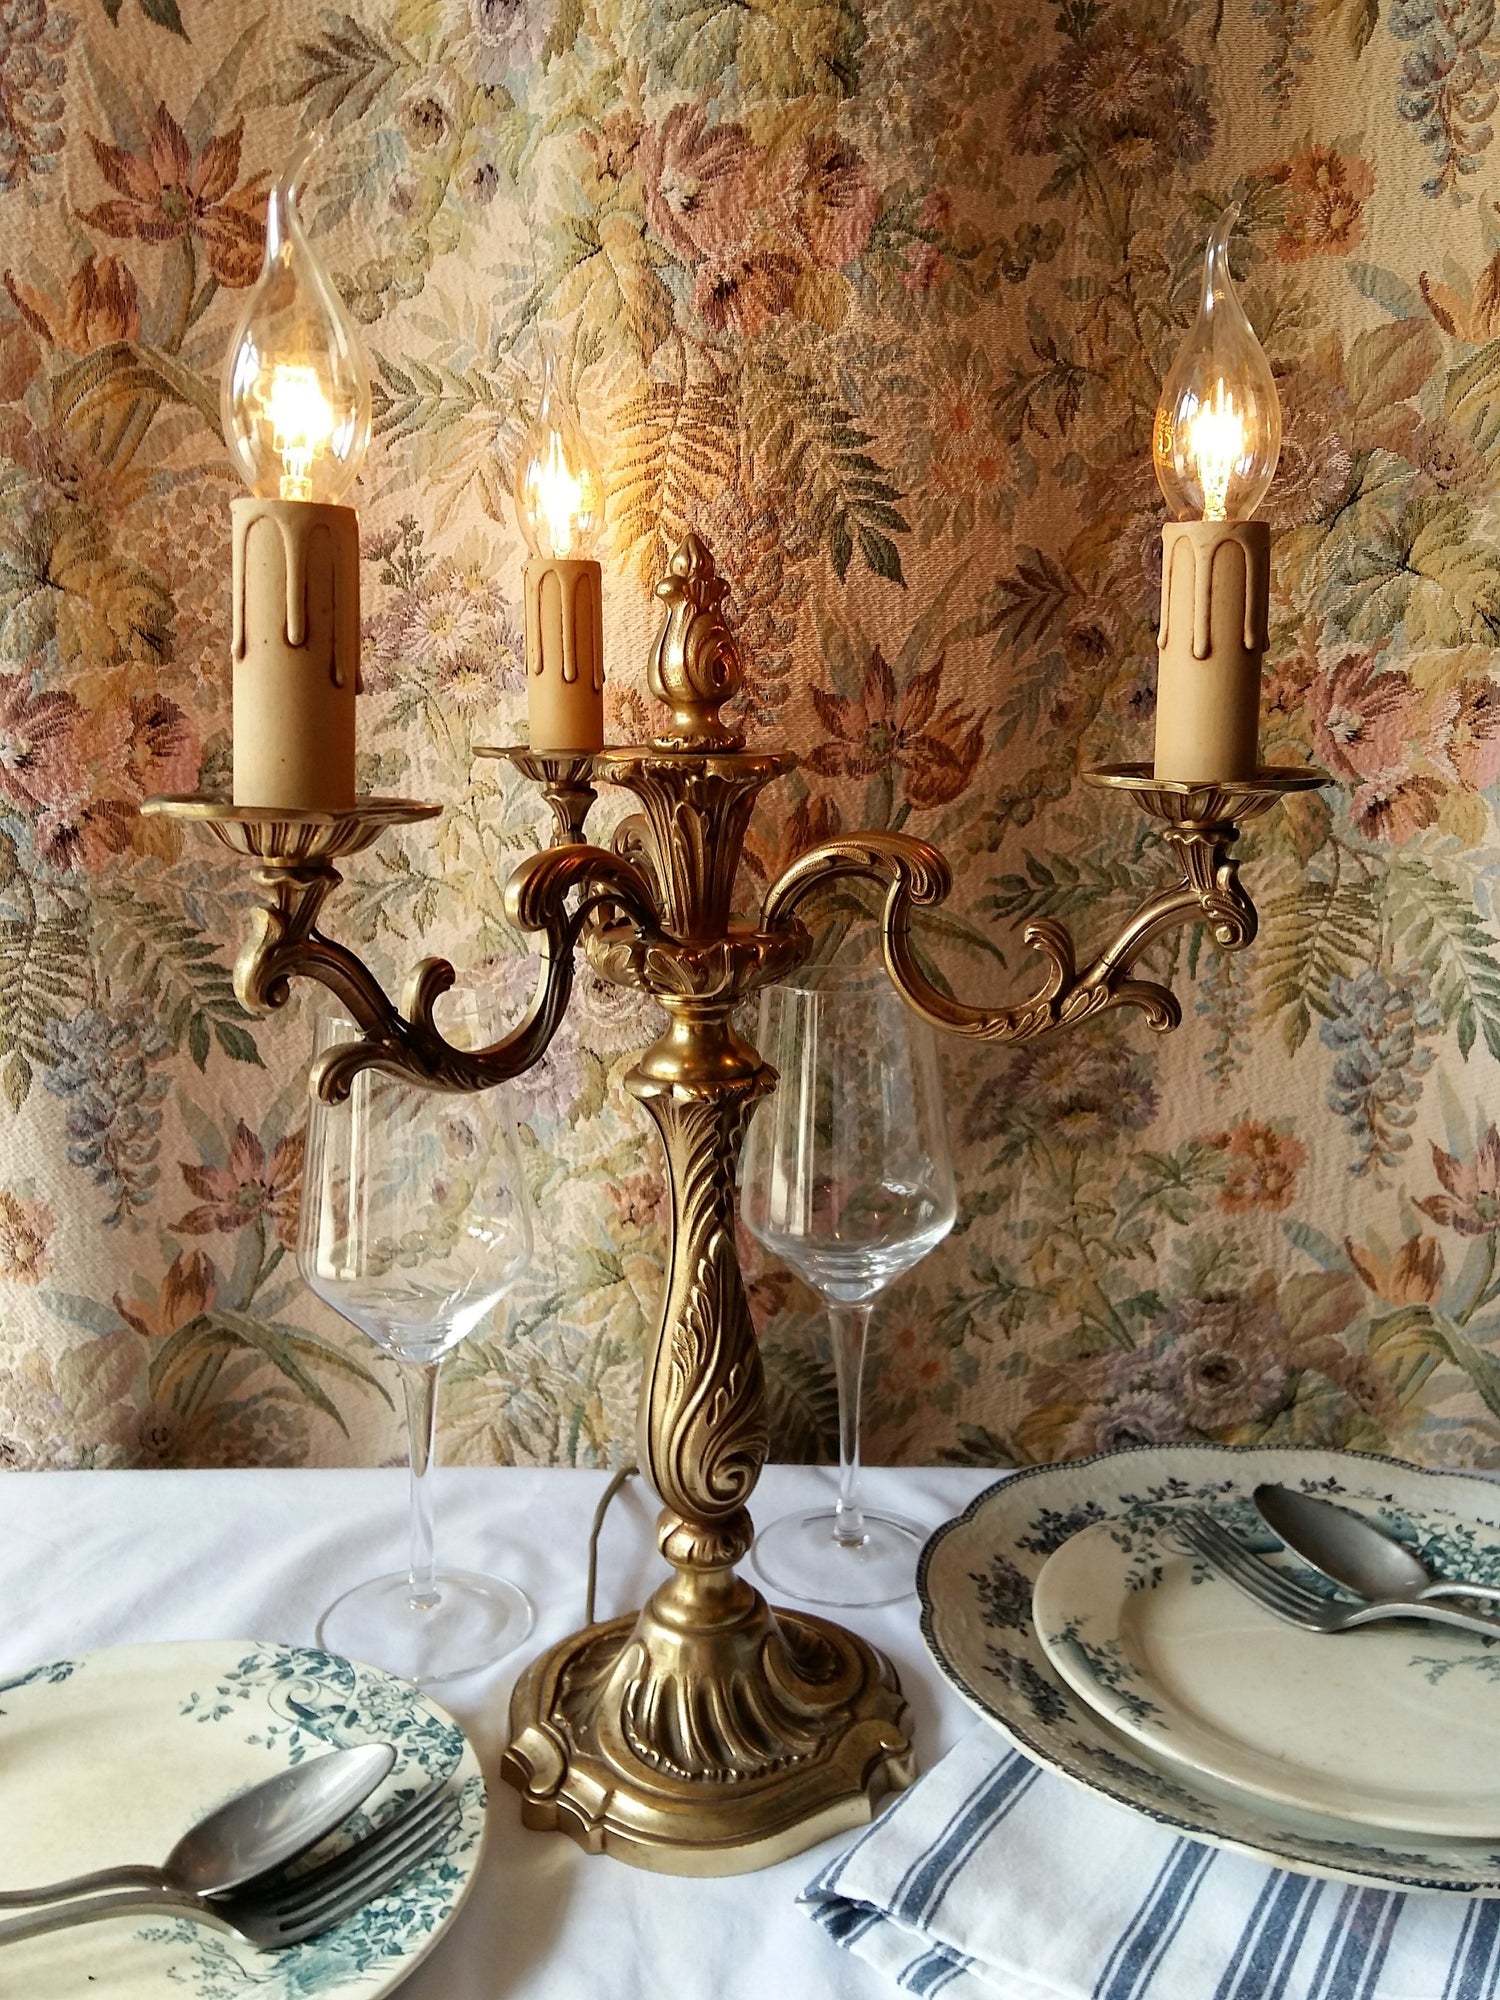 French Furniture and Lighting by Tiggy and Pip. Gorgeous French bronze chandeliers and candelabras  to add a touch of "Rococo/Baroque" style to any period home.